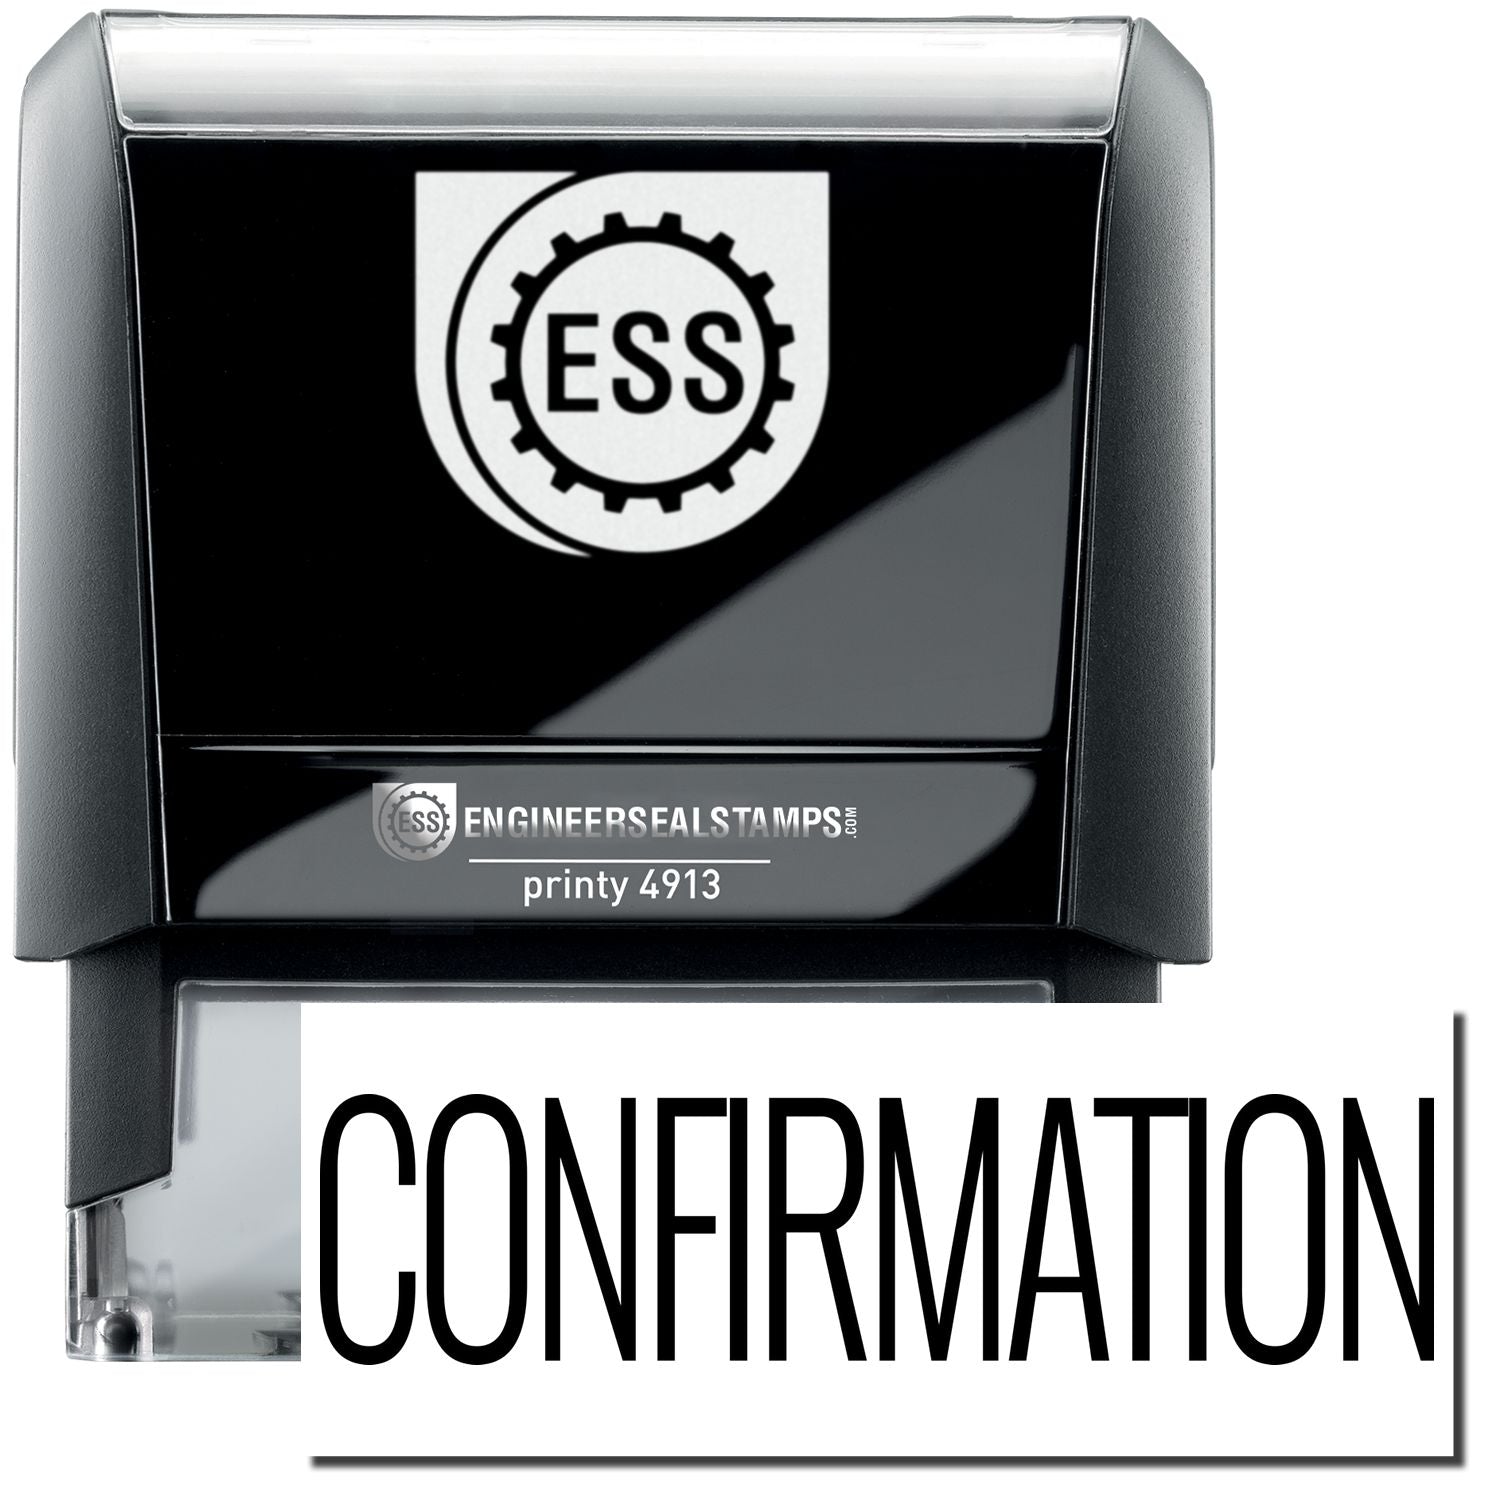 A self-inking stamp with a stamped image showing how the text "CONFIRMATION" in a large font is displayed by it after stamping.